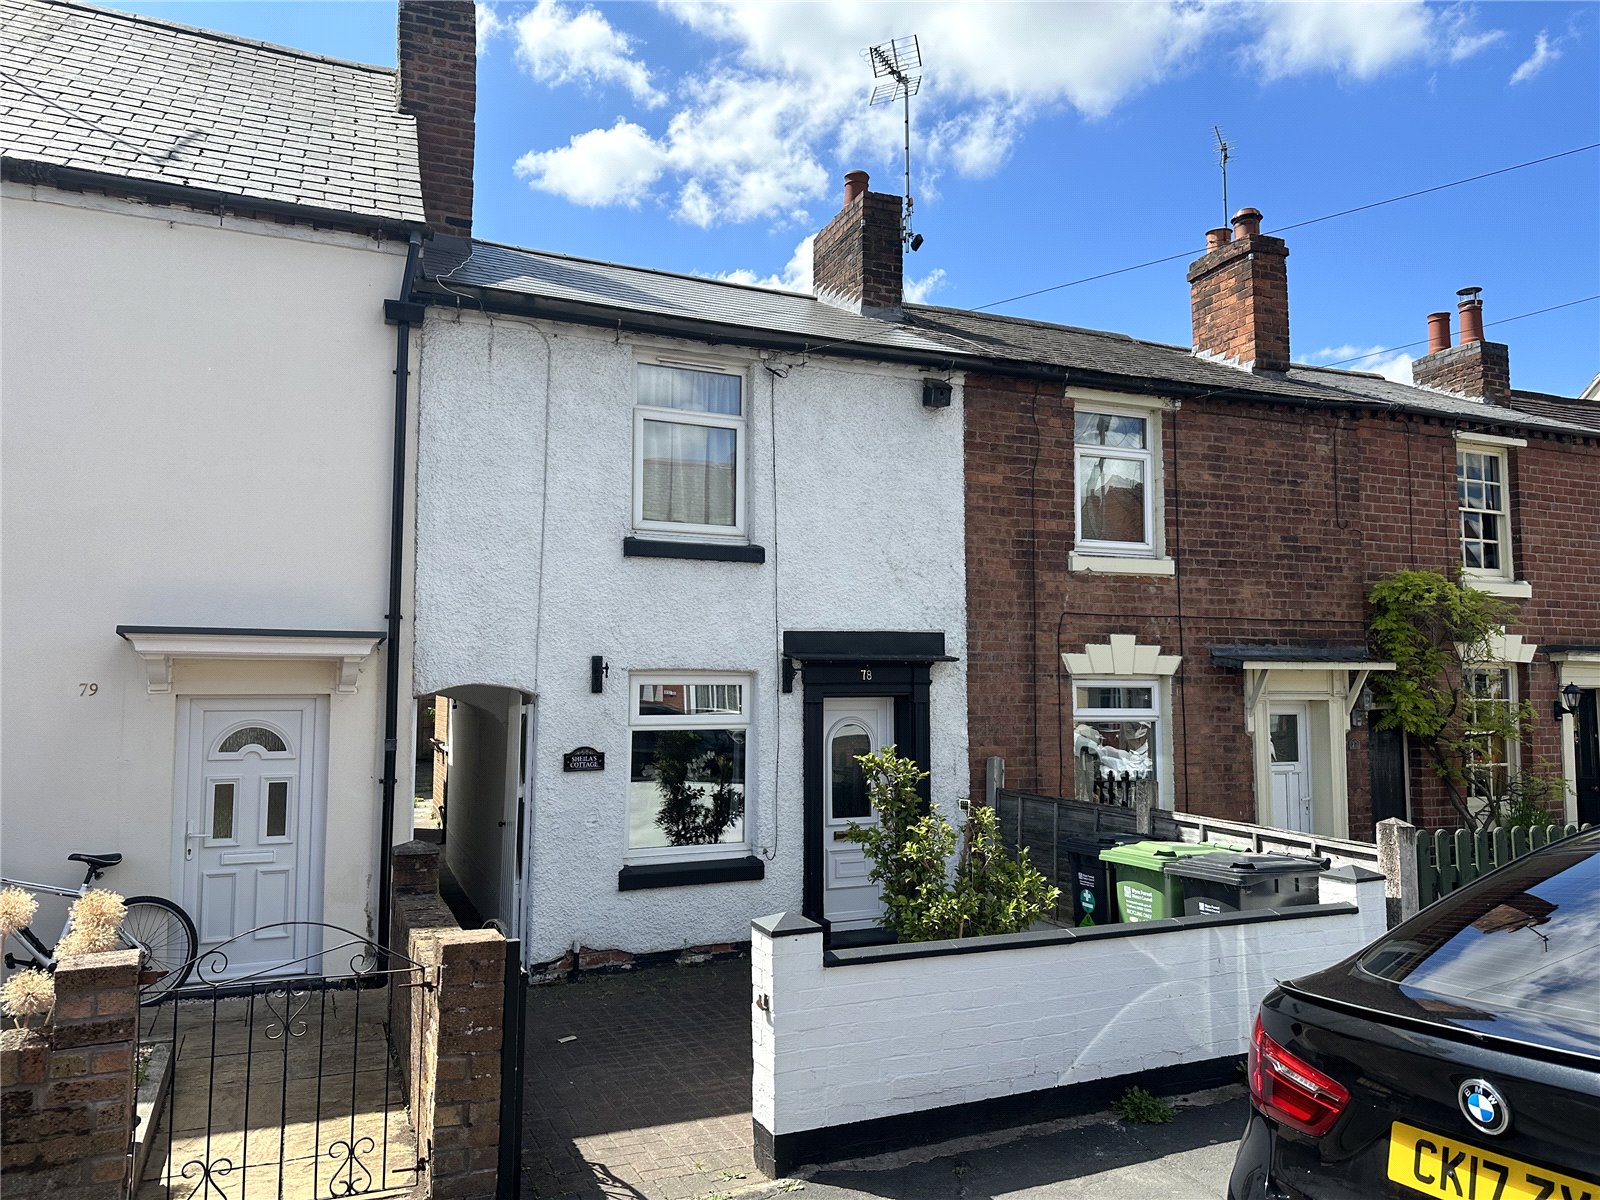 Offmore Road, Kidderminster, Worcestershire, DY10